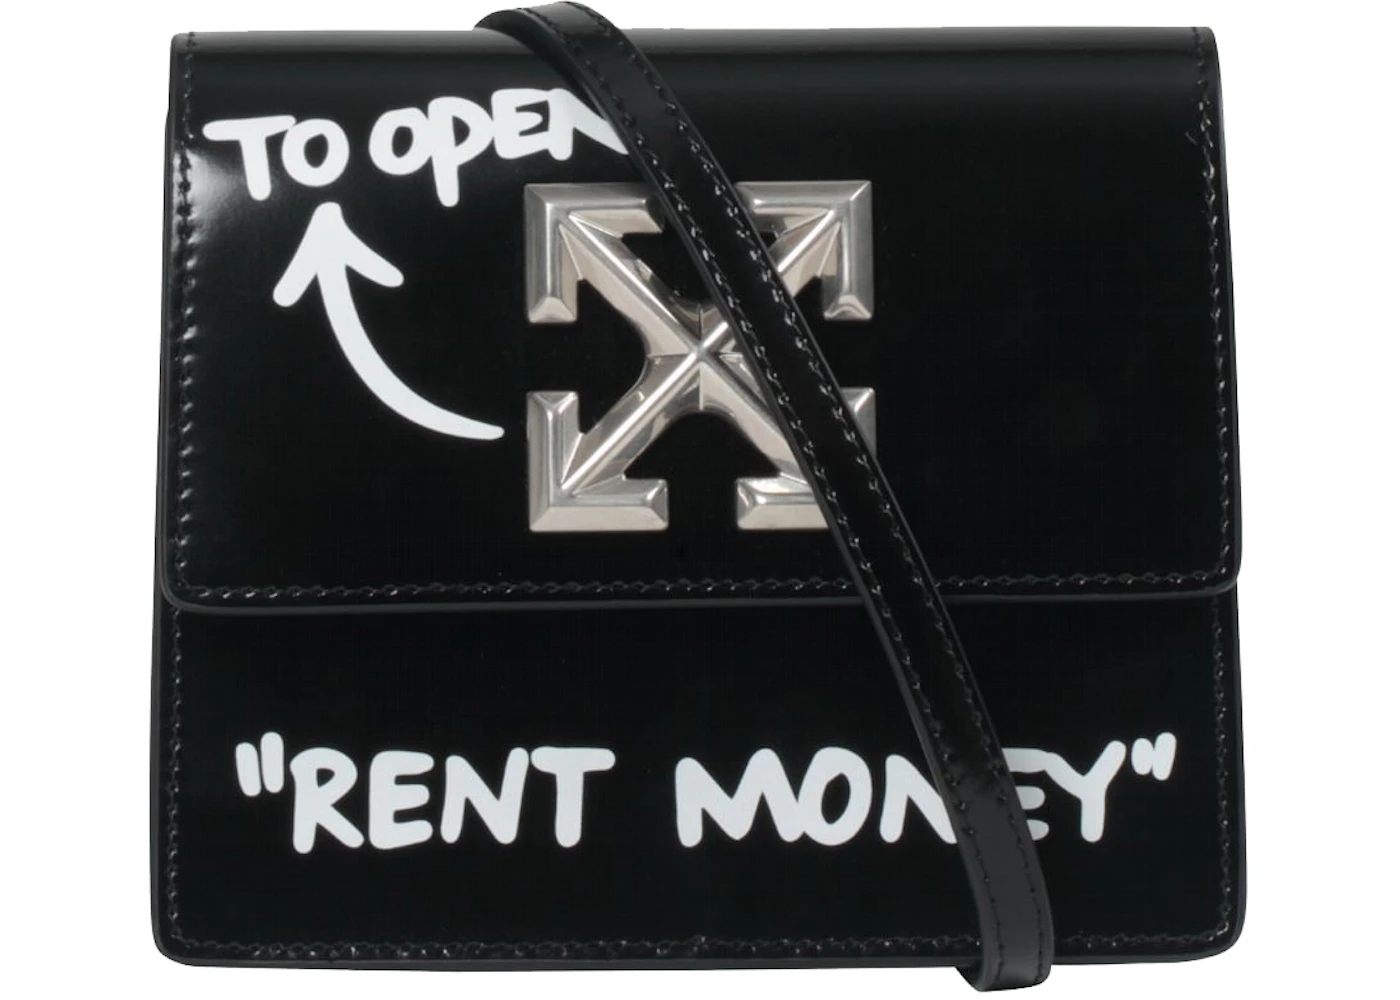 OFF-WHITE 0.7 Jitney Bag RENT MONEY Black/White in Leather with  Silver-tone - US